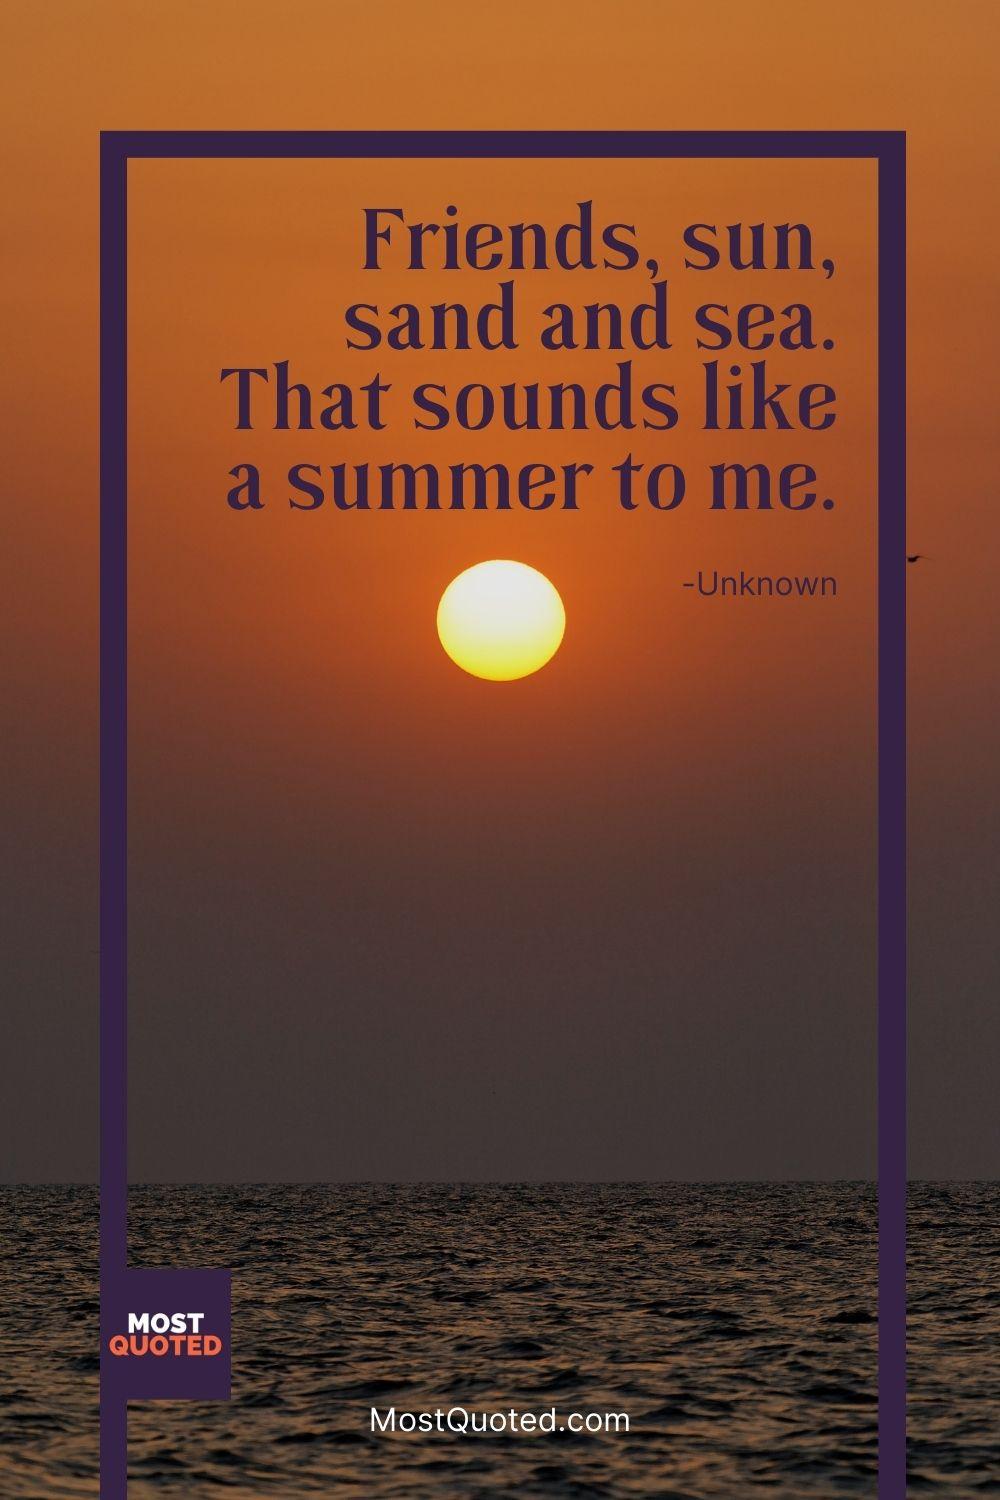 Friends, sun, sand and sea. That sounds like a summer to me. - Unknown